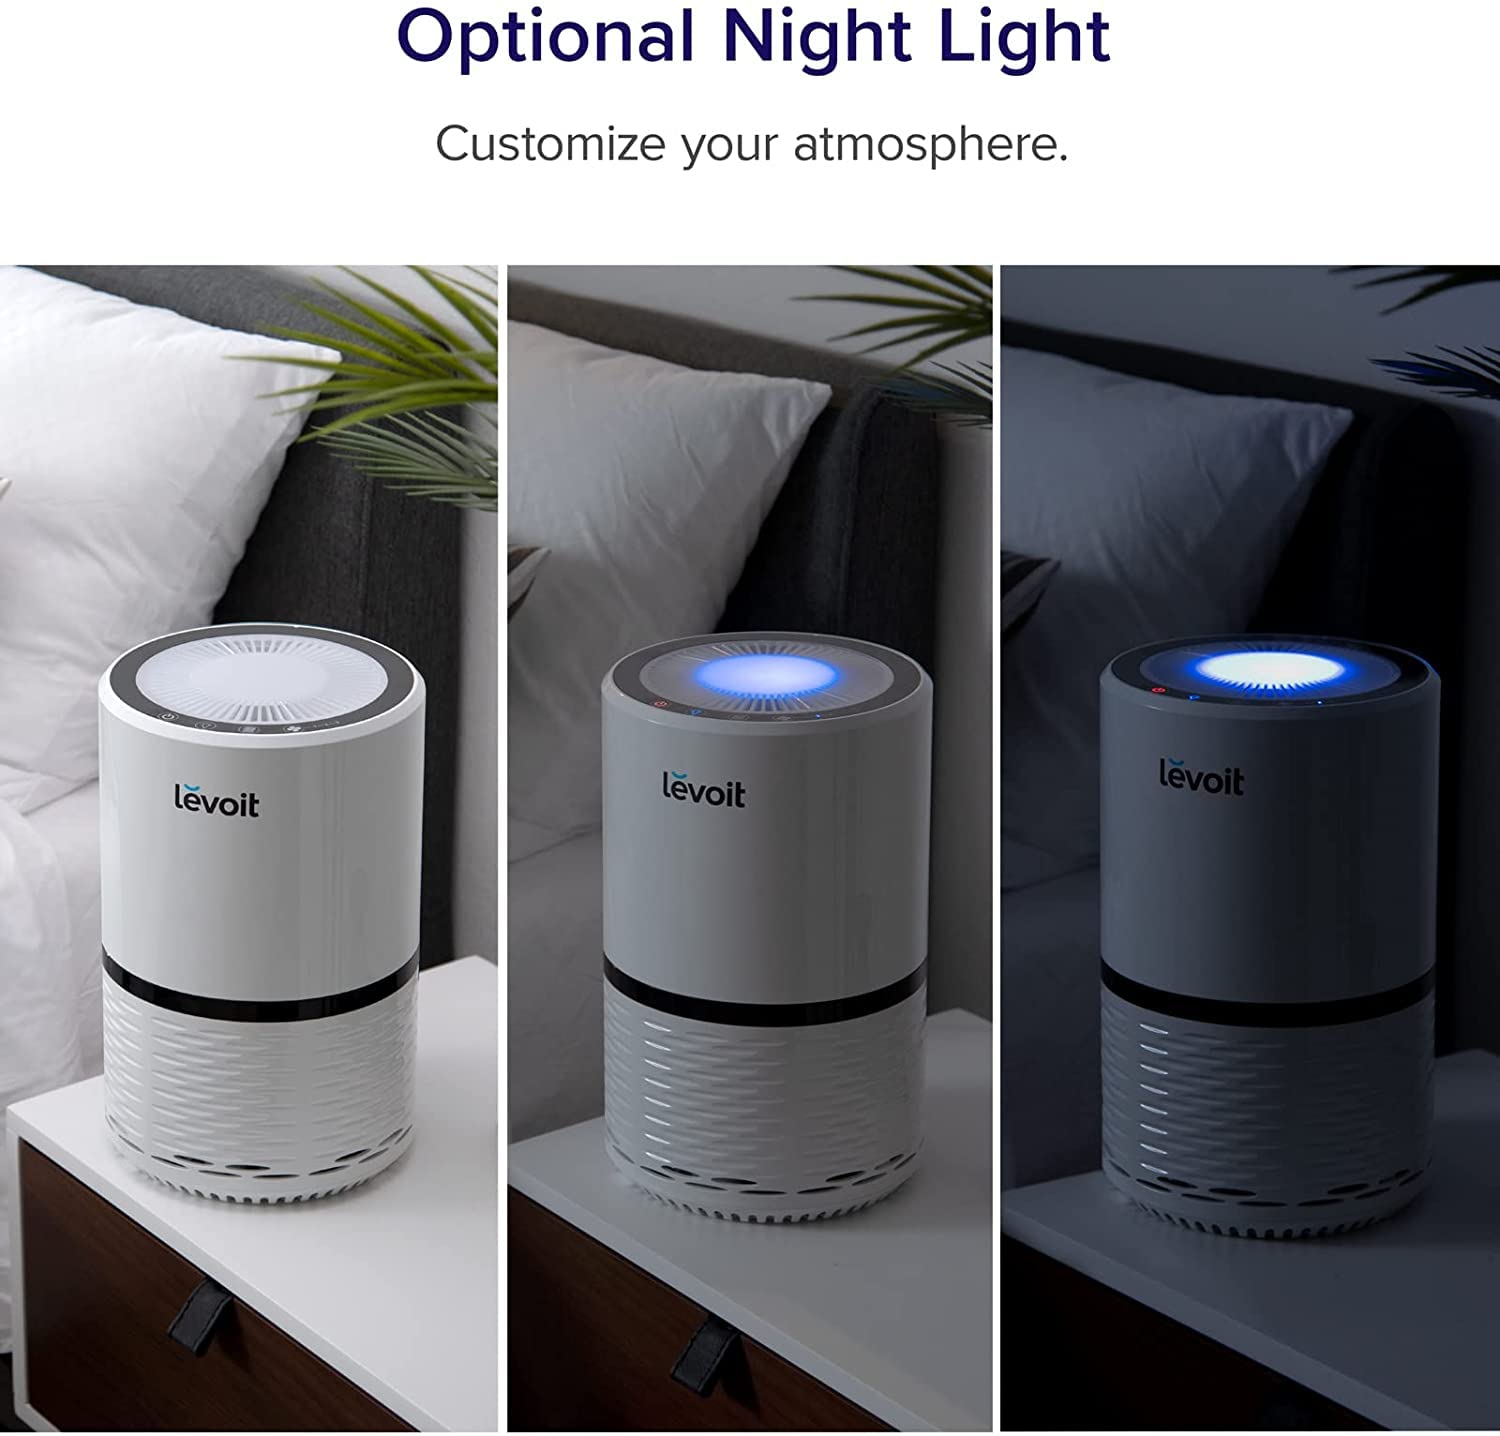 LEVOIT Air Purifiers for Home, HEPA Filter for Smoke, Dust and Pollen in Bedroom, Ozone Free, Filtration System Odor Eliminators for Office with Optional Night Light, 1 Pack, White